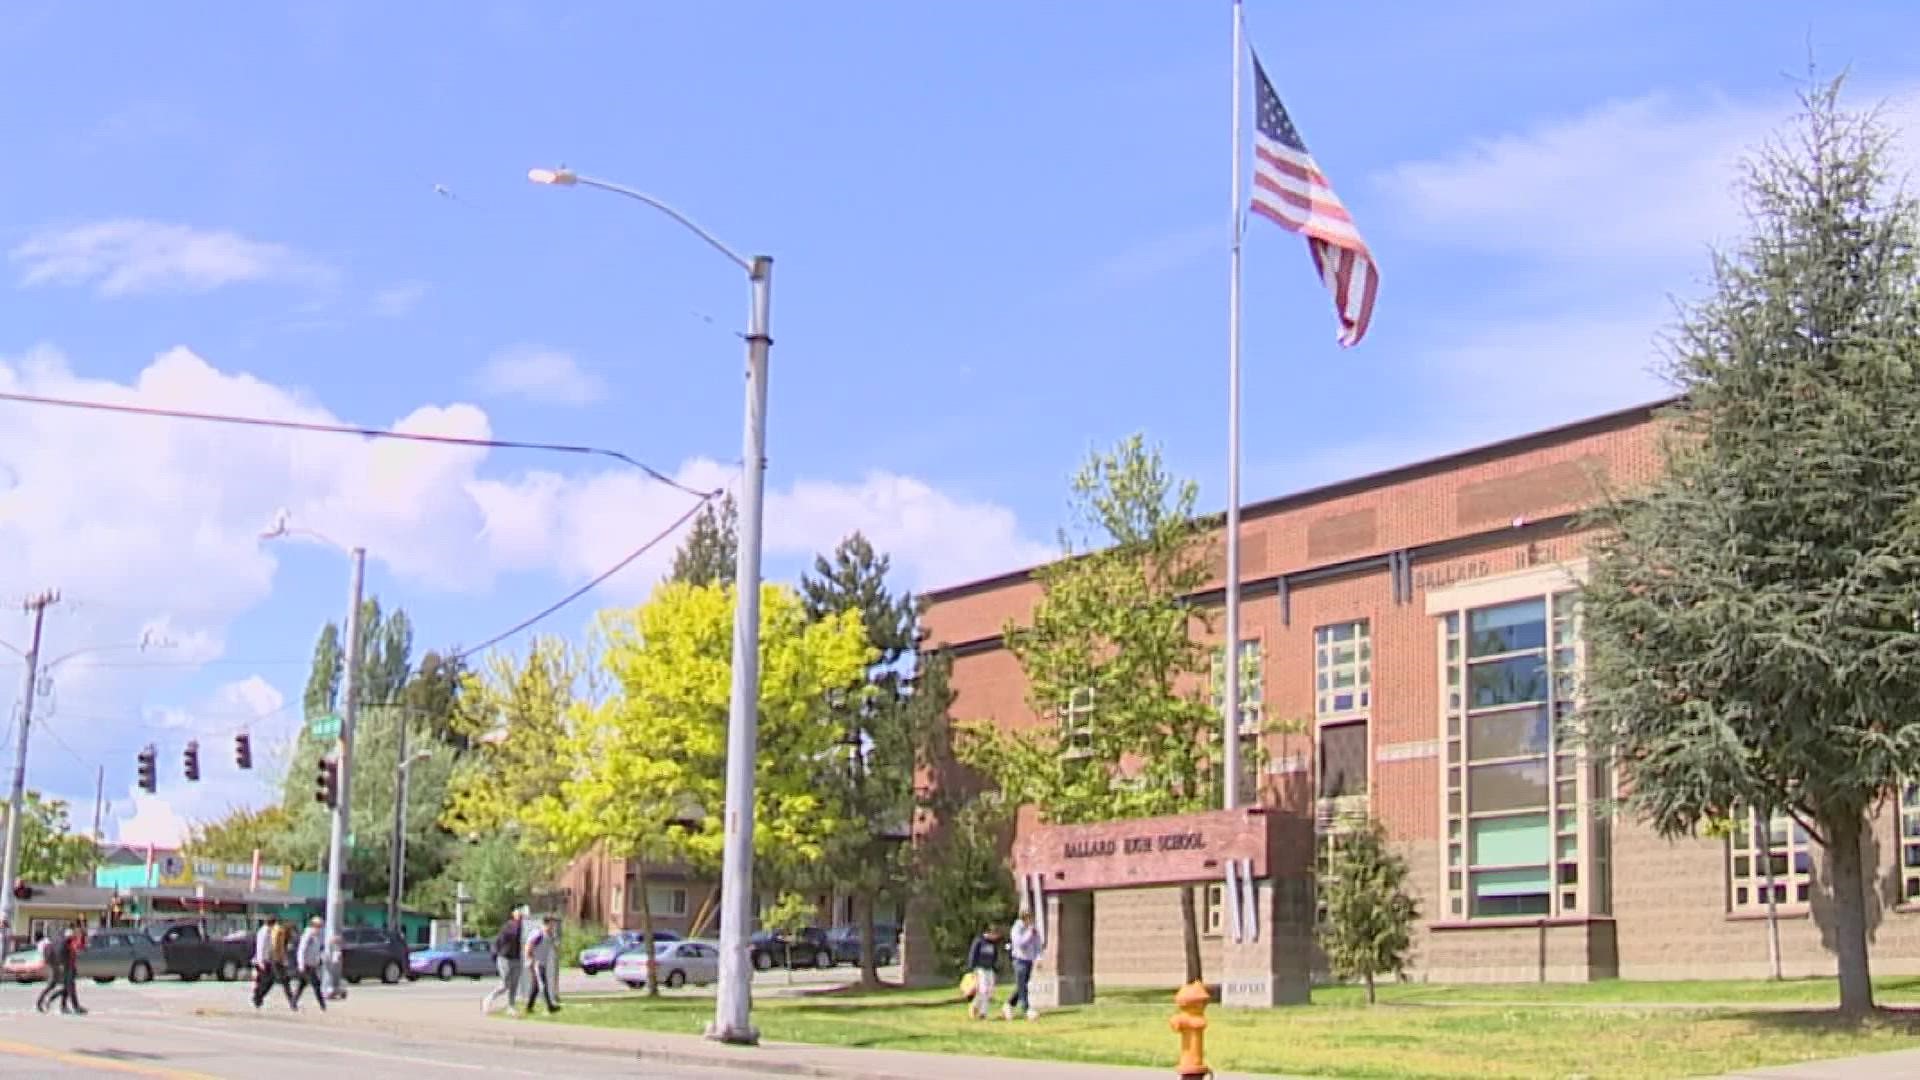 A lawsuit over sexual abuse allegations at Ballard High School is no longer heading to trial after the district agreed to pay the student $3 million.